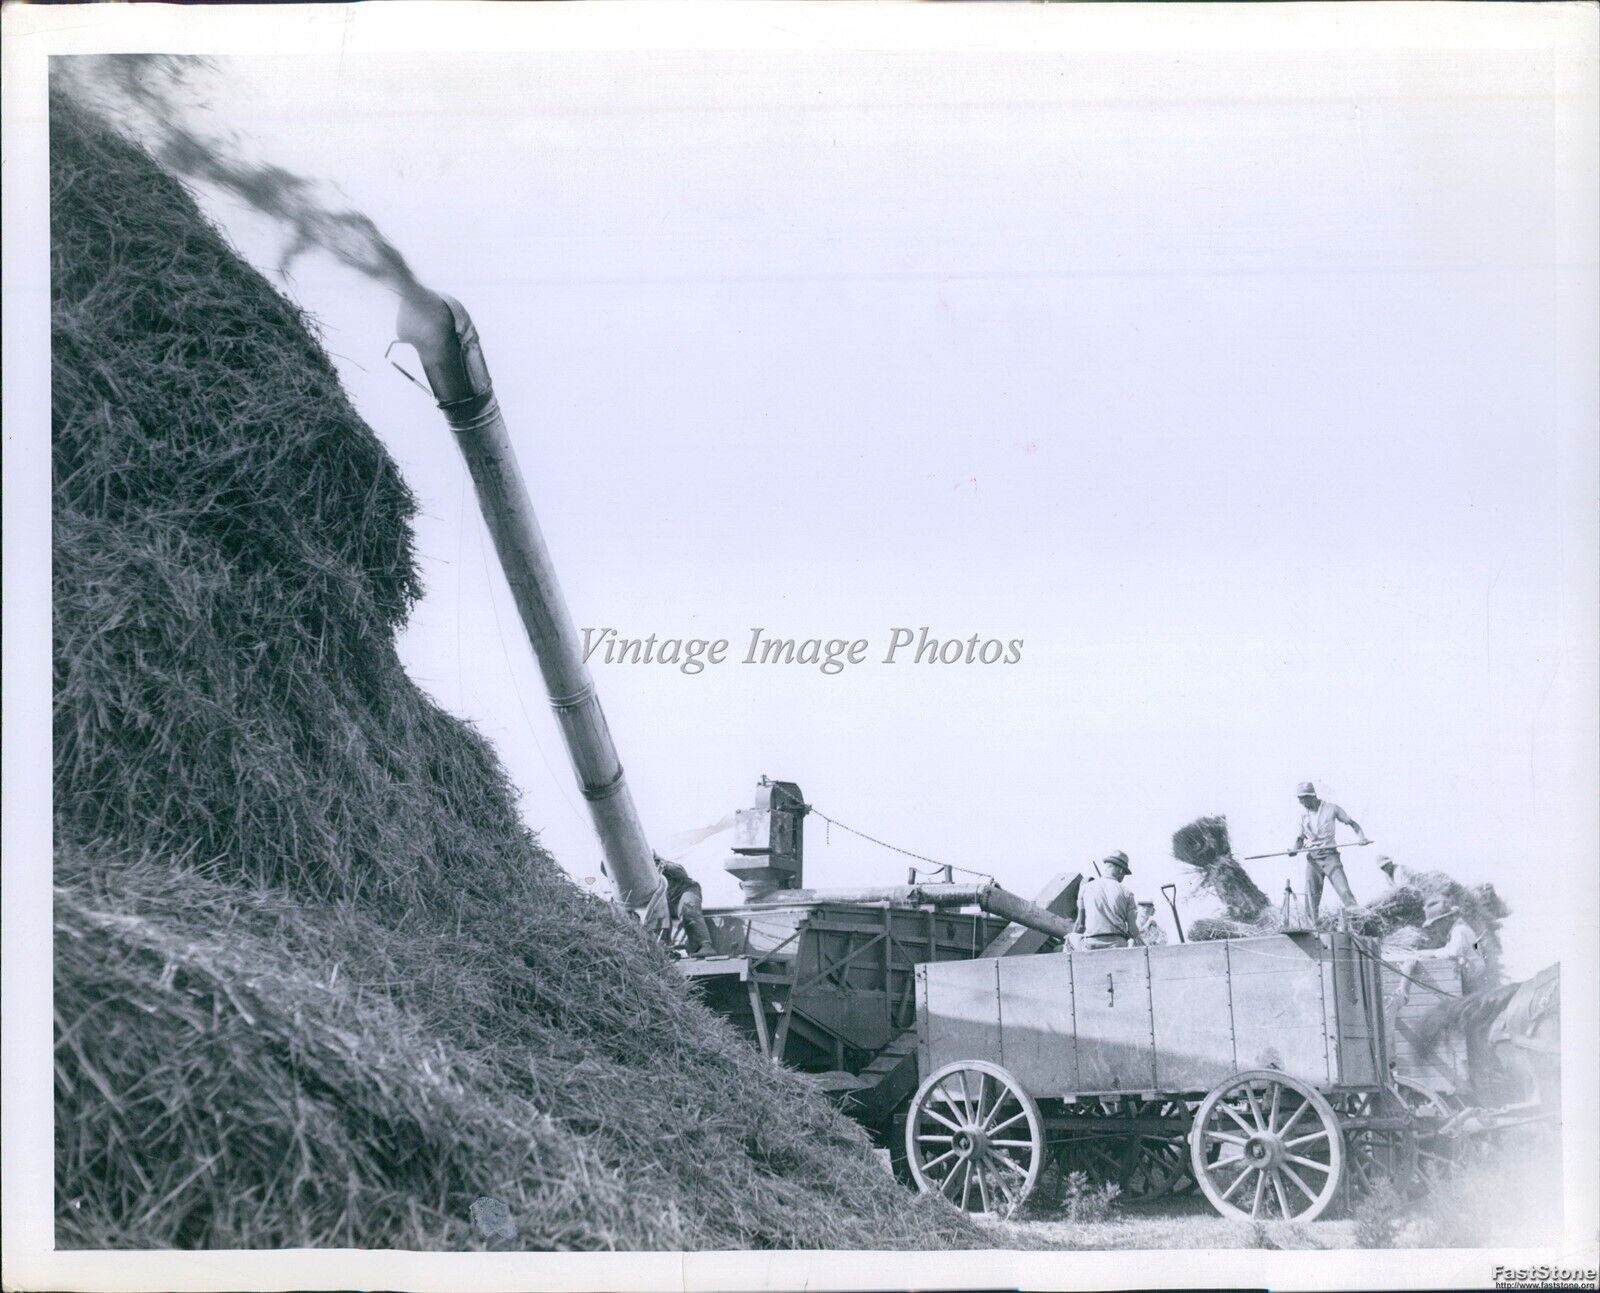 1937 Hay Bundles Emerge From Thresher To Build Tall Stack Agriculture Photo 8X10